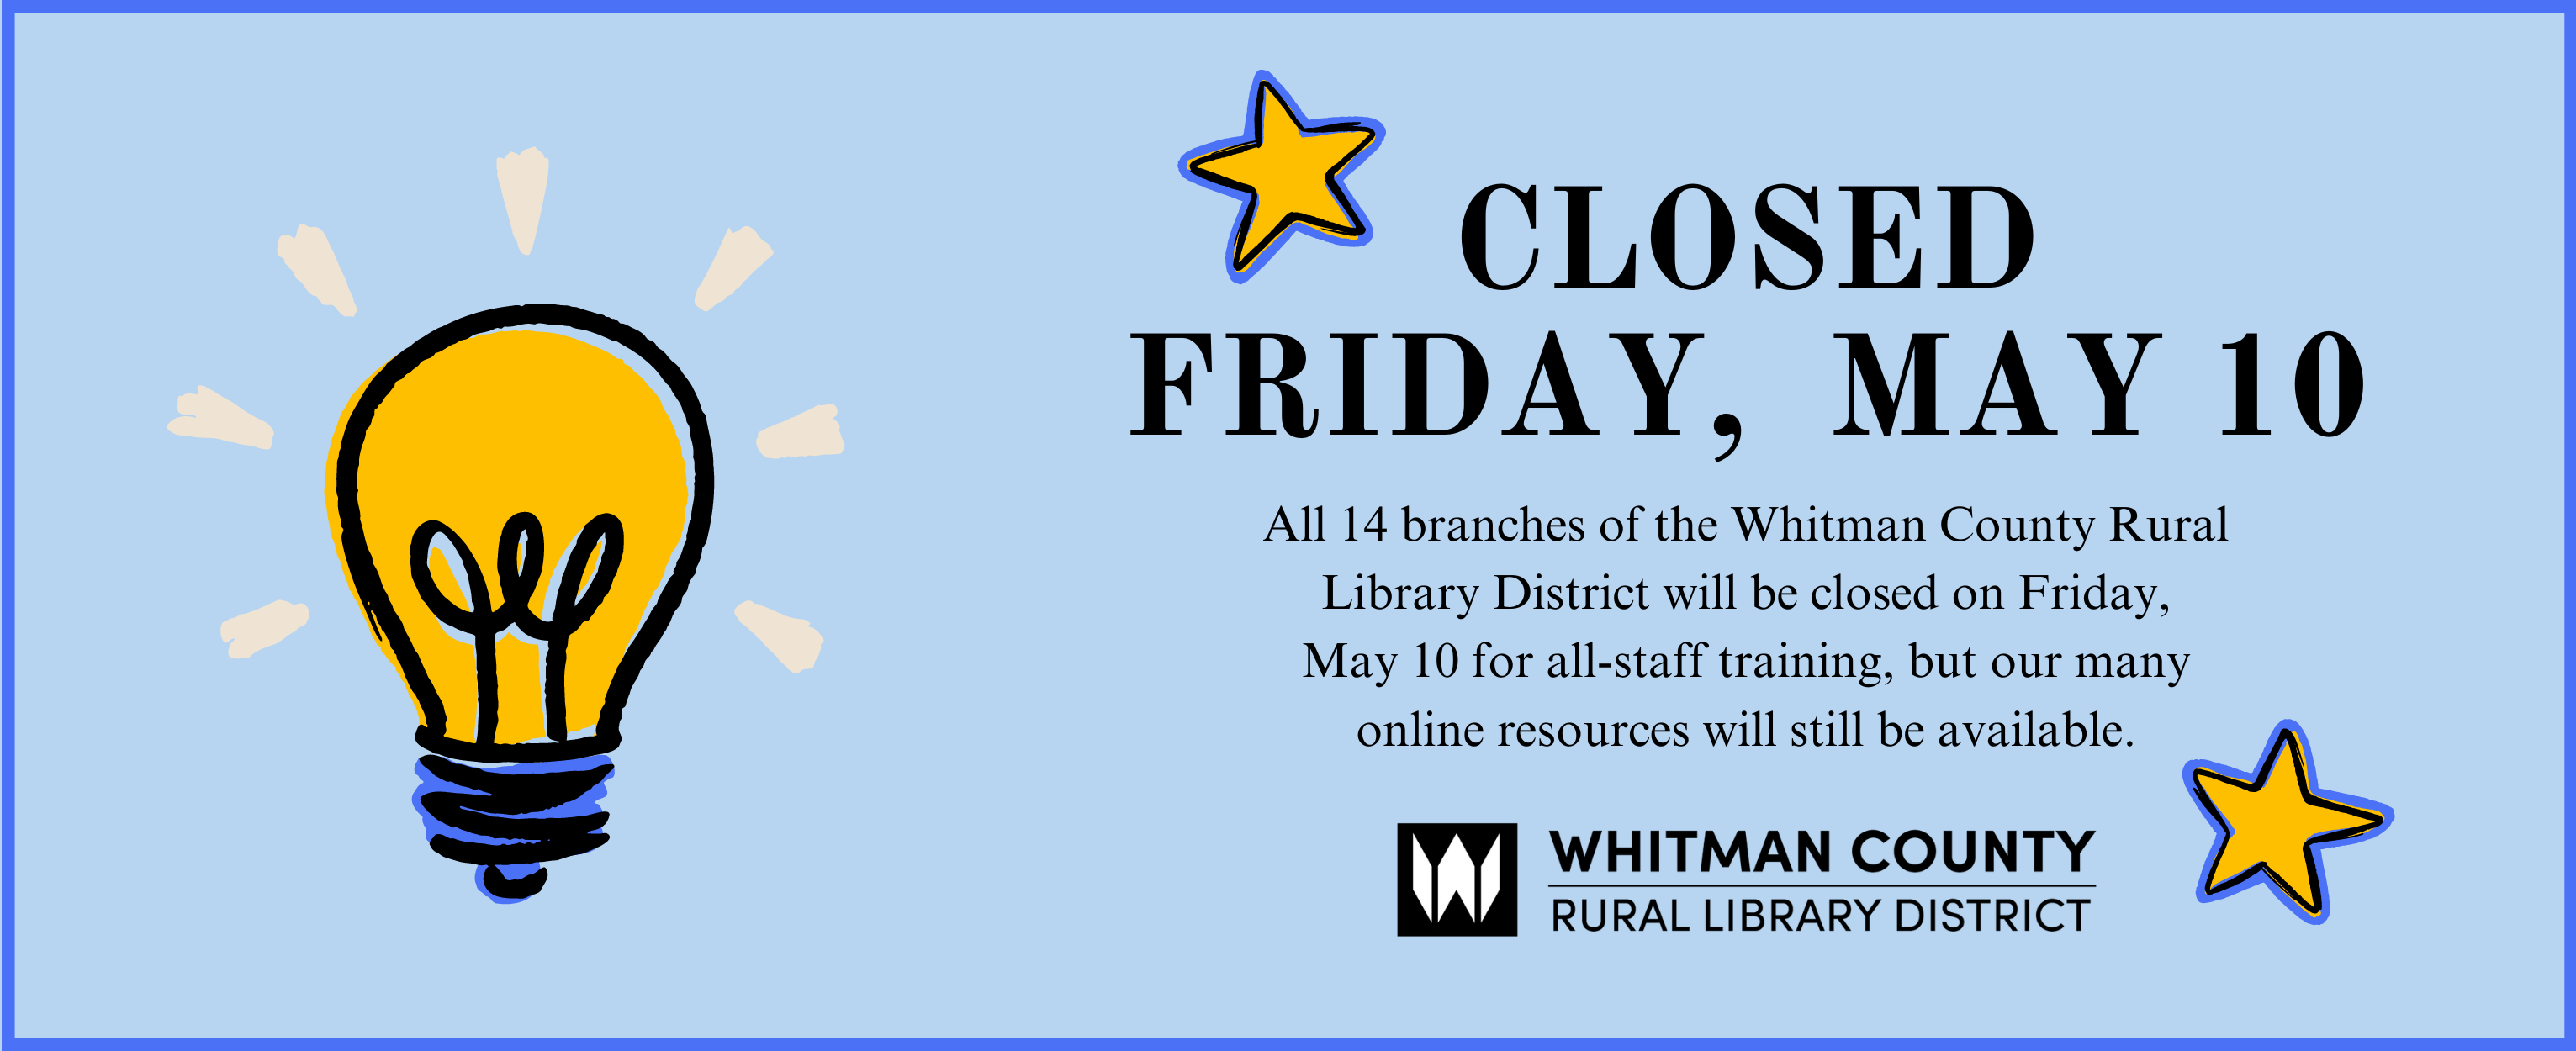 All 14 branches of Whitman County Library will be closed for staff training on Friday, May 10.